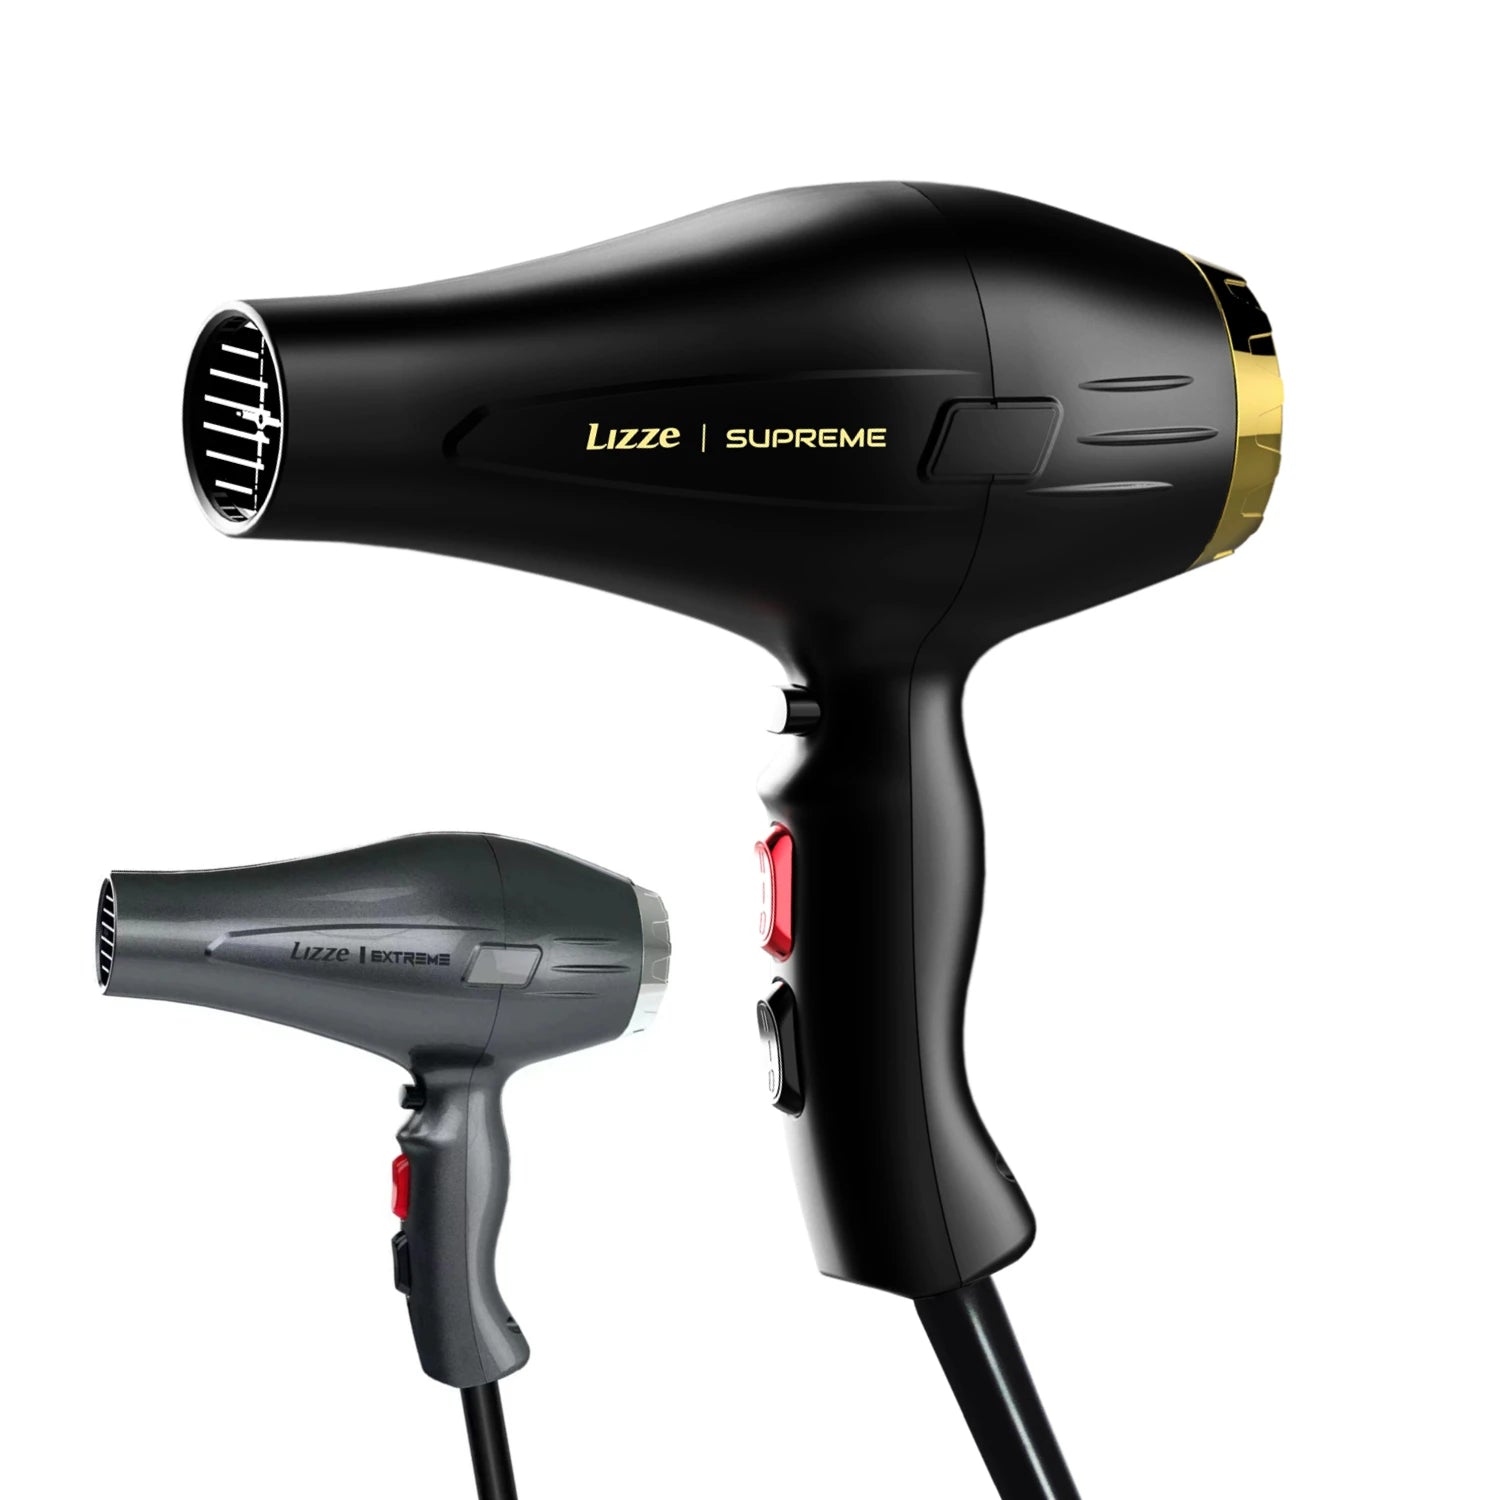 Professional Salon Hair Dryer 2600w 2400w High Power 3 Speed Selection Styling Tool